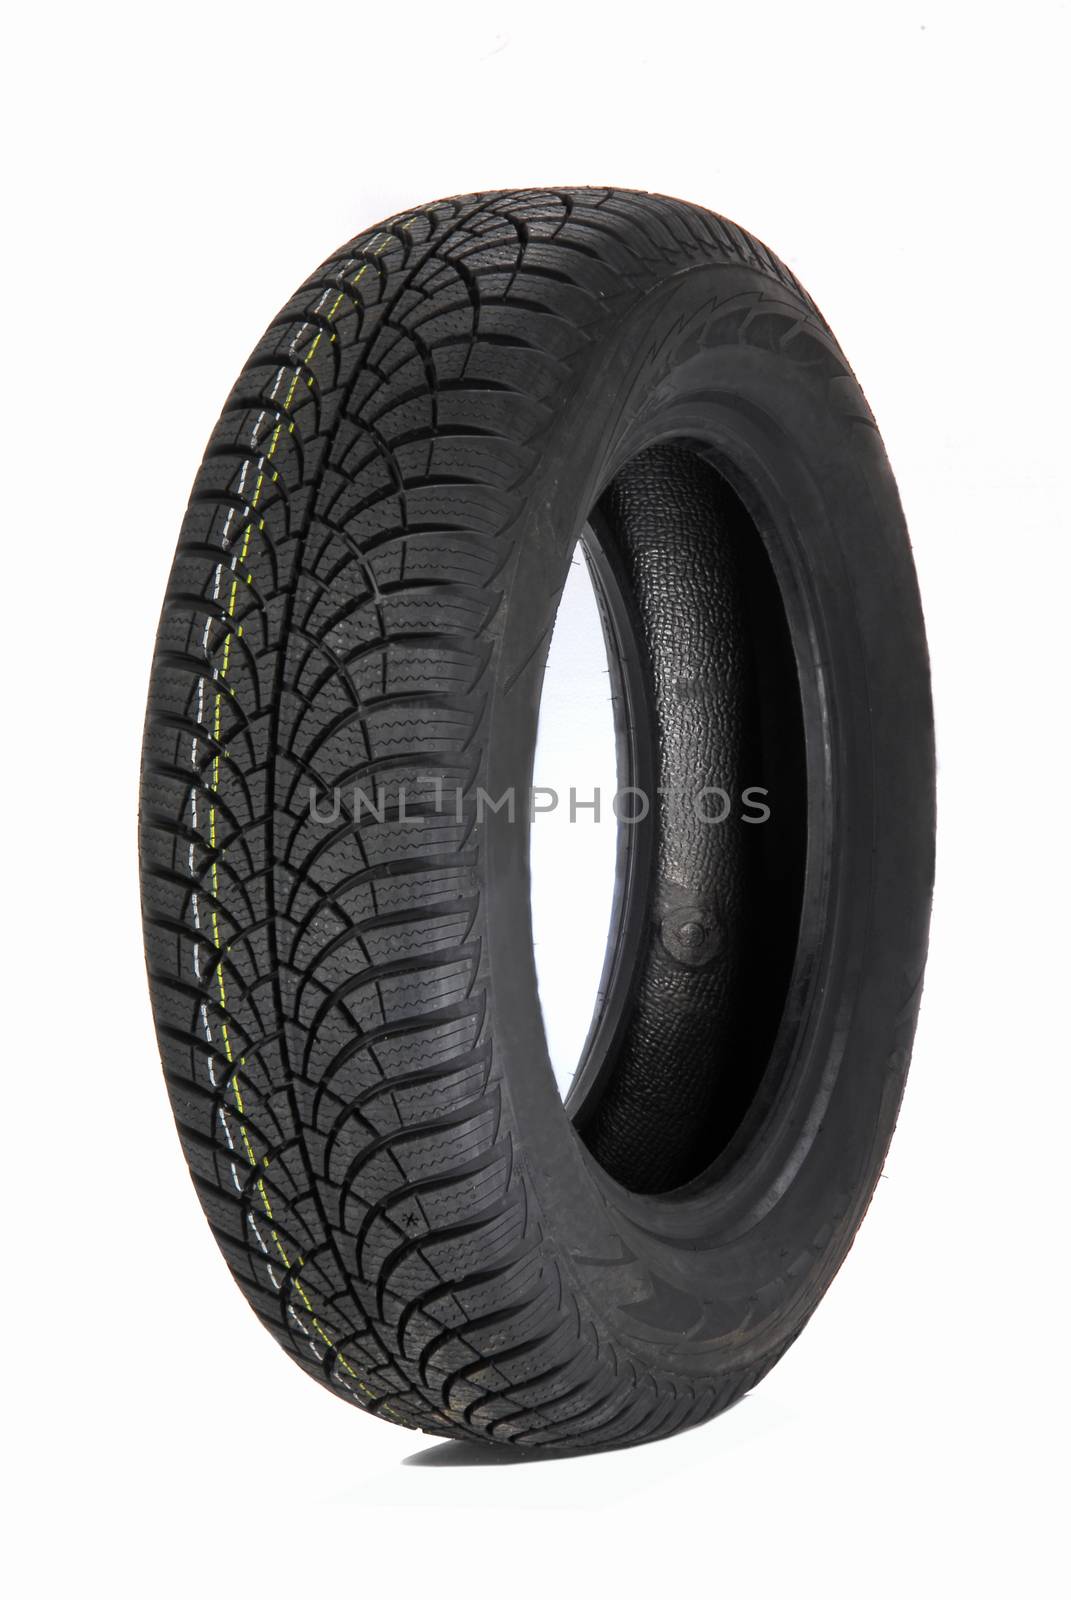 brand new winter car tire, all view